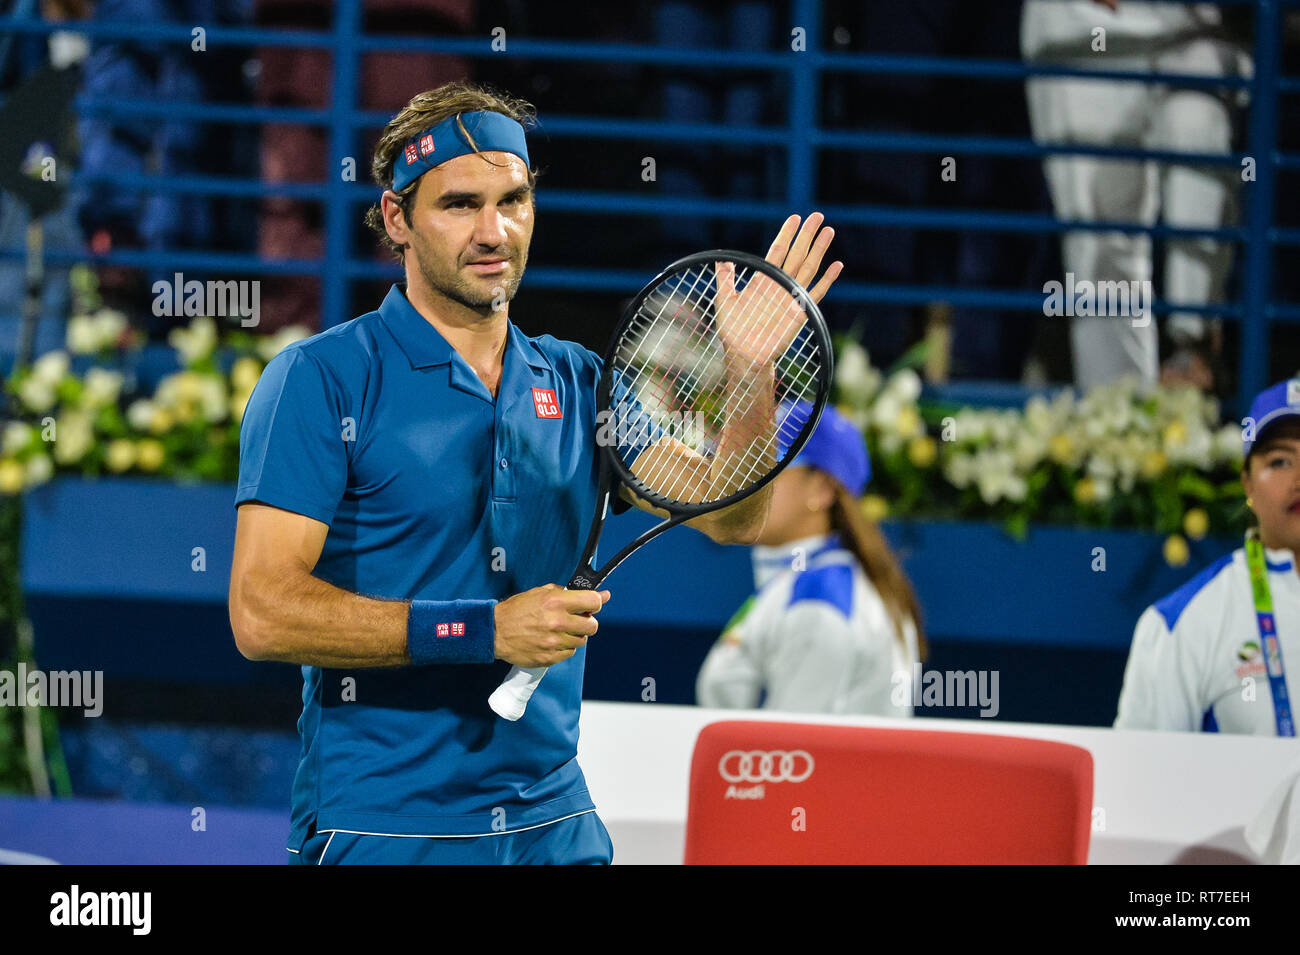 Dubai, UAE. 28th February 2019. Former World no. 1 Roger Federer of  Switzerland acknowledges the crowd after winning in straight sets against  Hungarian Marton Fucsovics in the quarter finals of the 2019